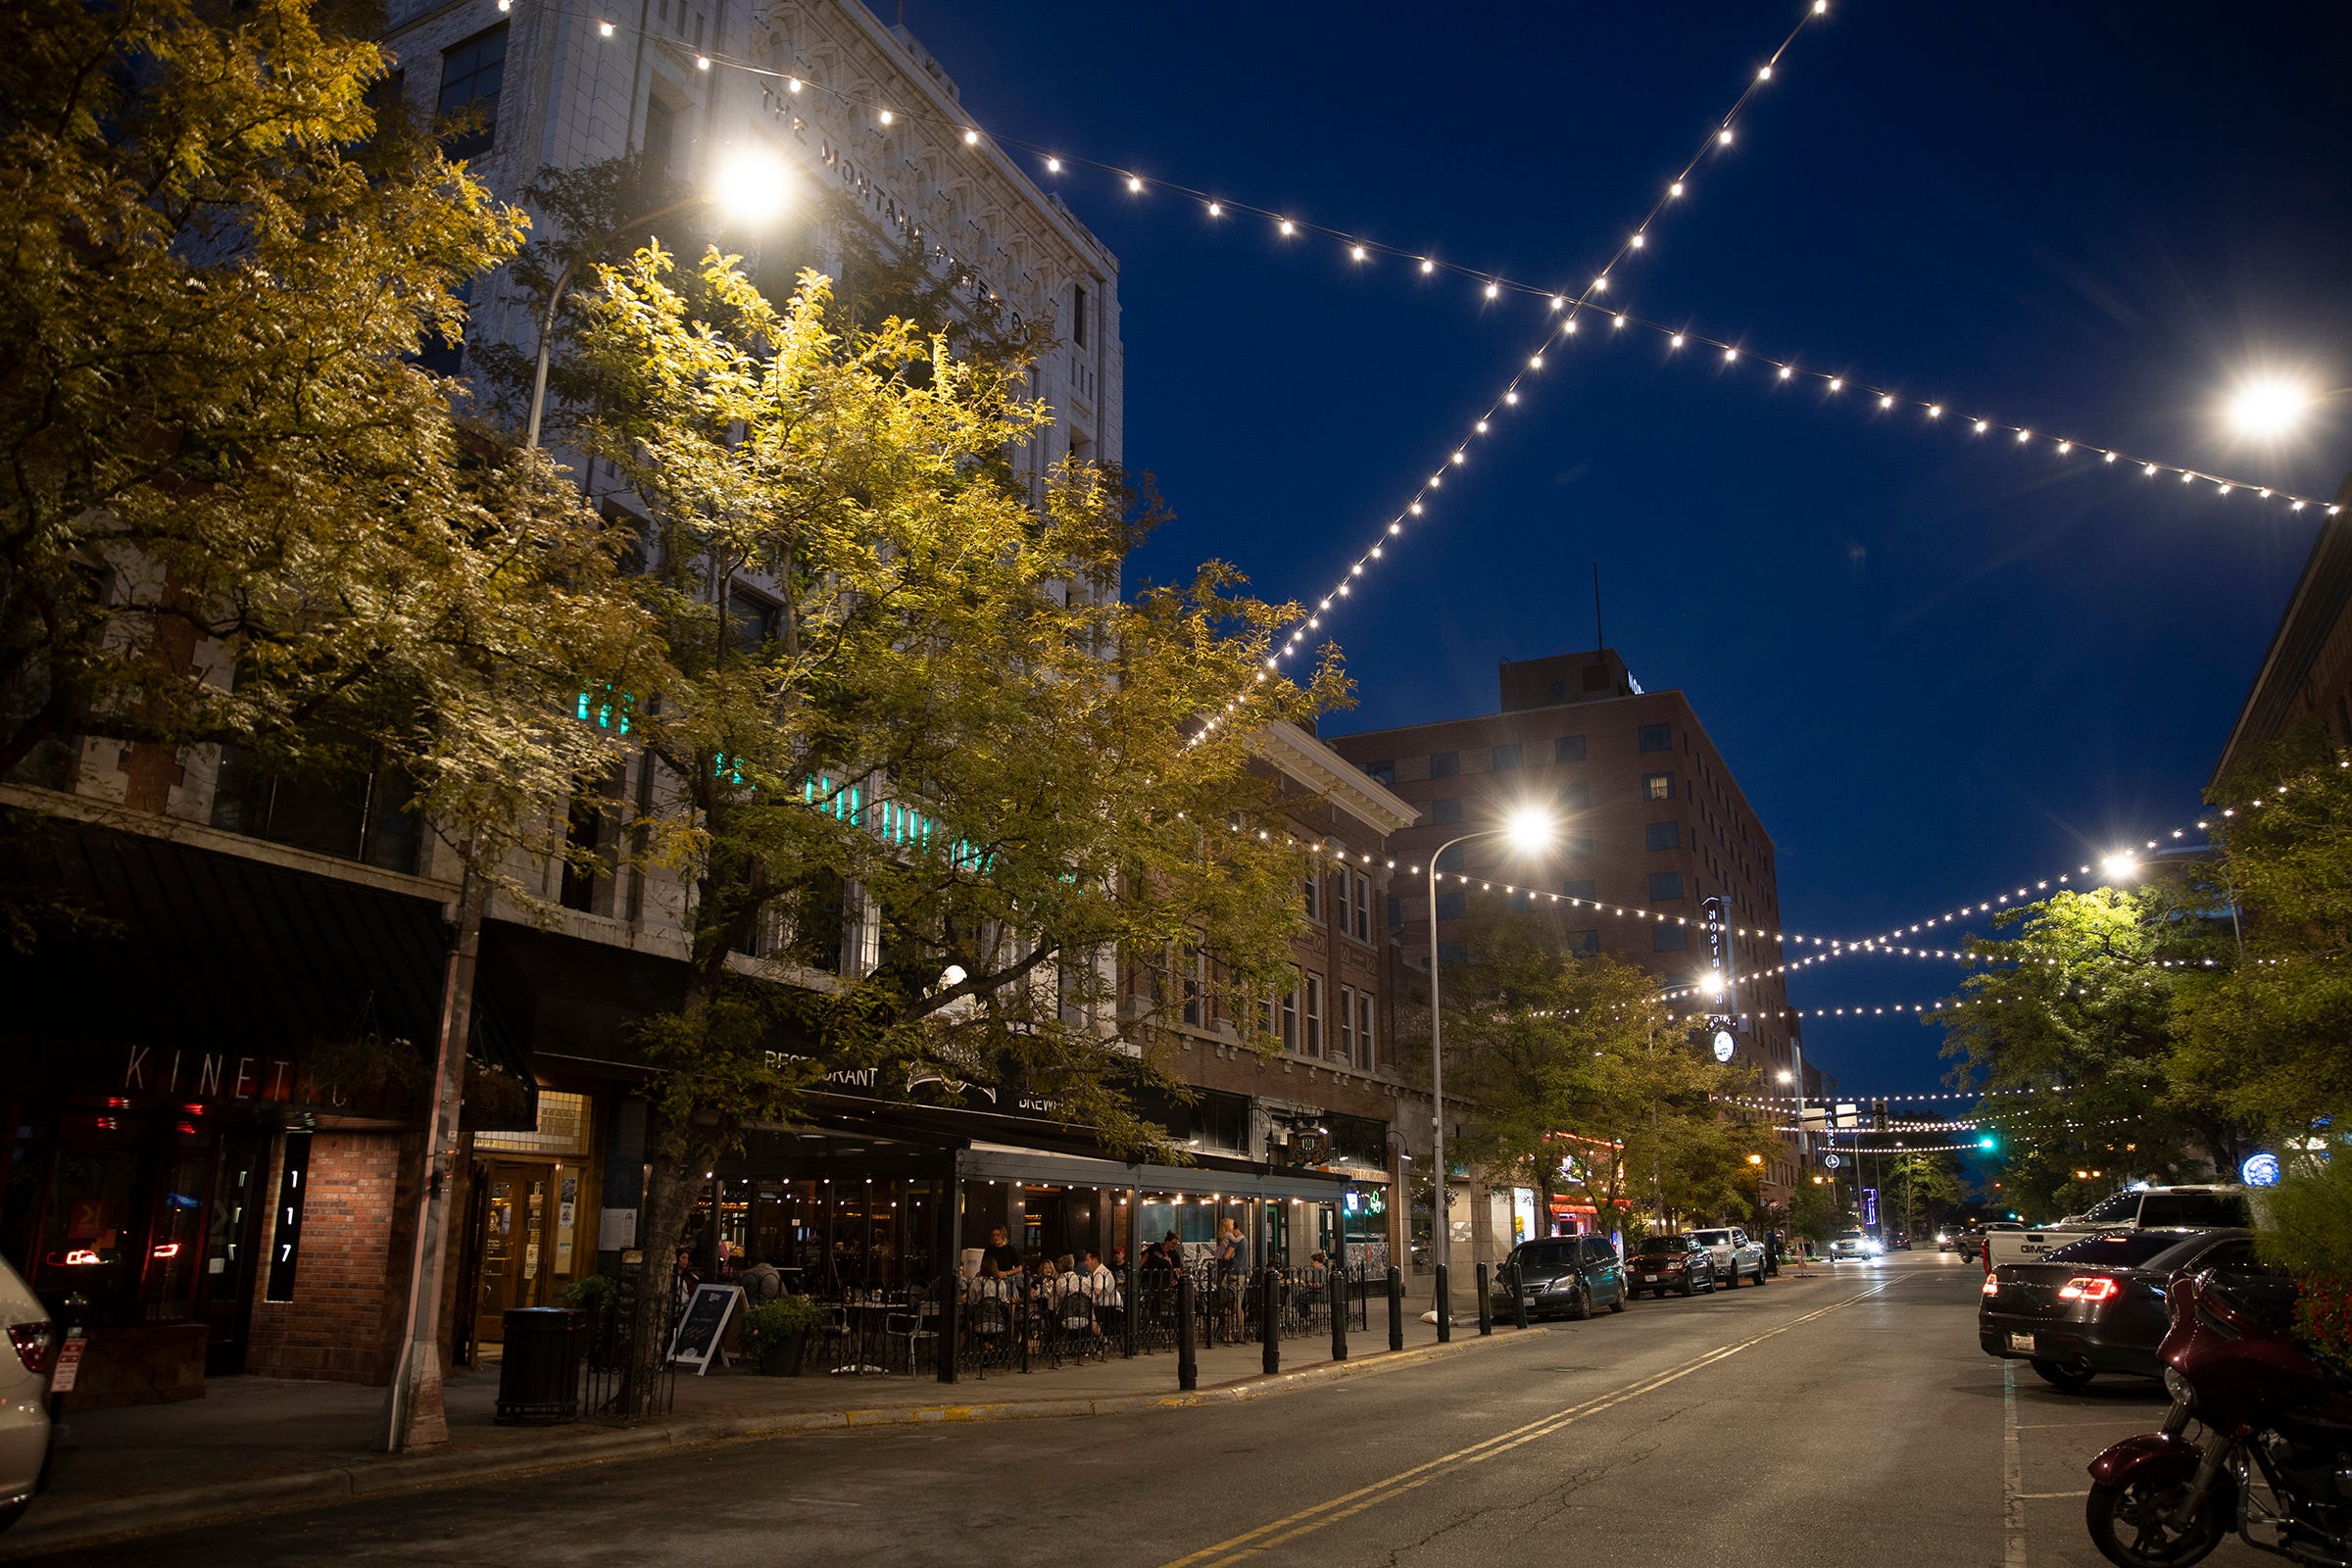 Fairy light are suspended above a wide road in downtown Billings at night.